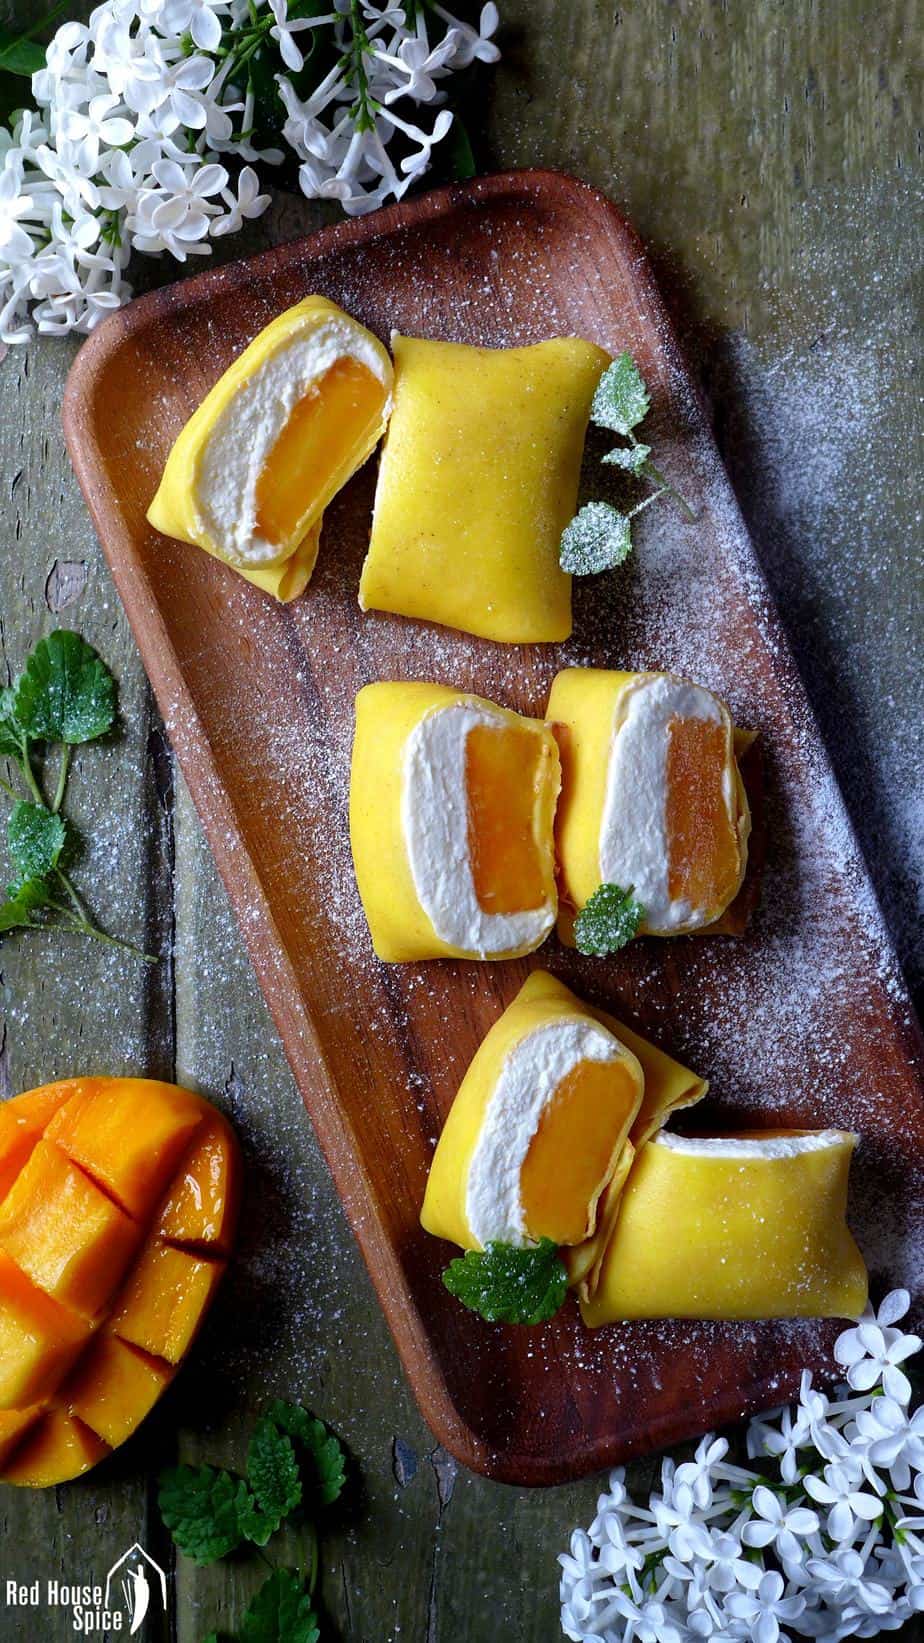 Fresh mango chunks topped with fluffy whipped cream, then wrapped with thin, moist and elastic crepes, these pillow-shaped mango pancakes are to die for.